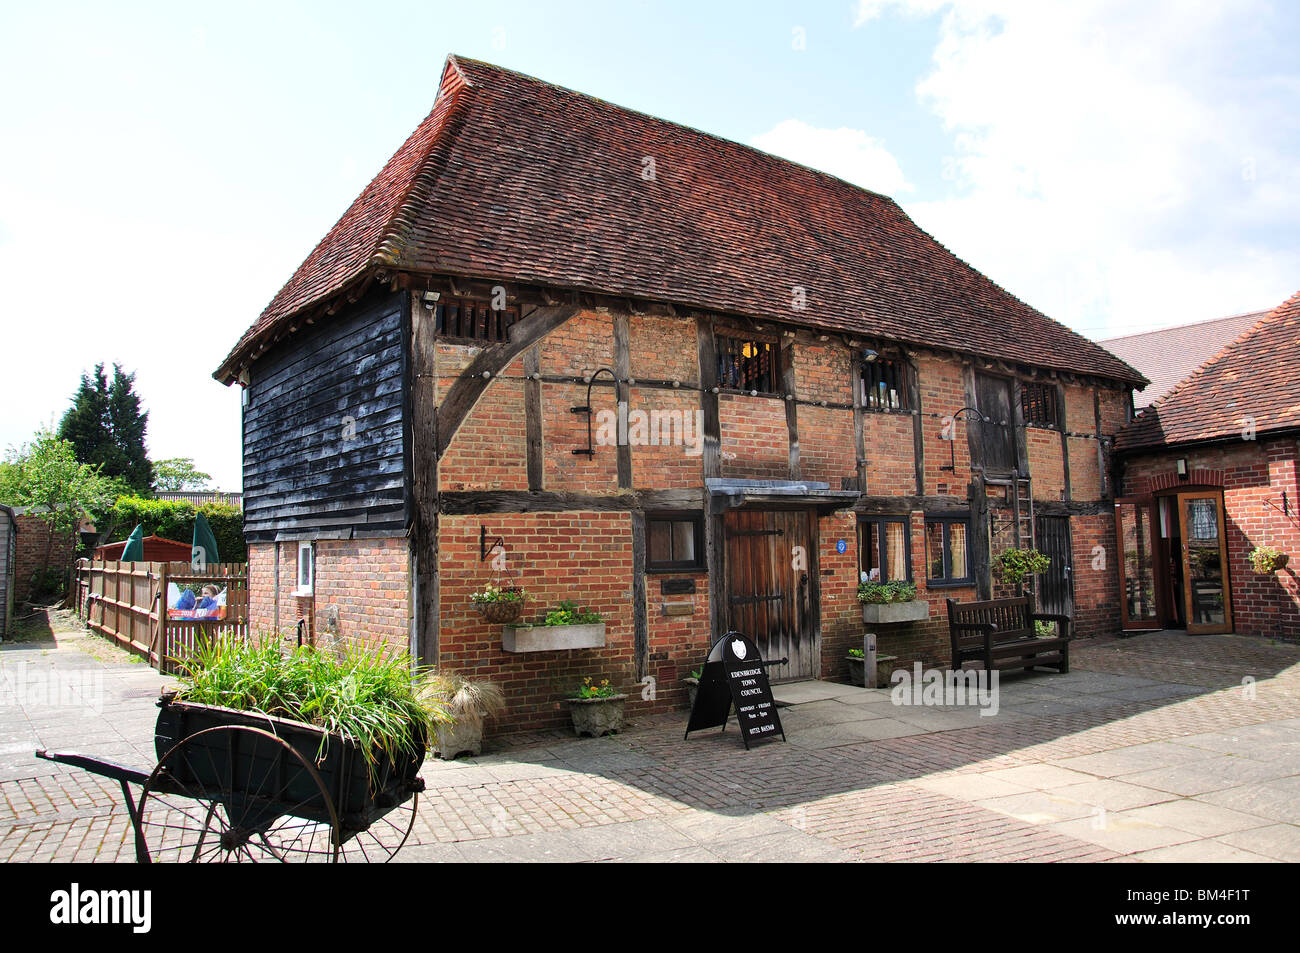 Dogget's Barn, High Street, Canterbury, Kent, England, United Kingdom Banque D'Images